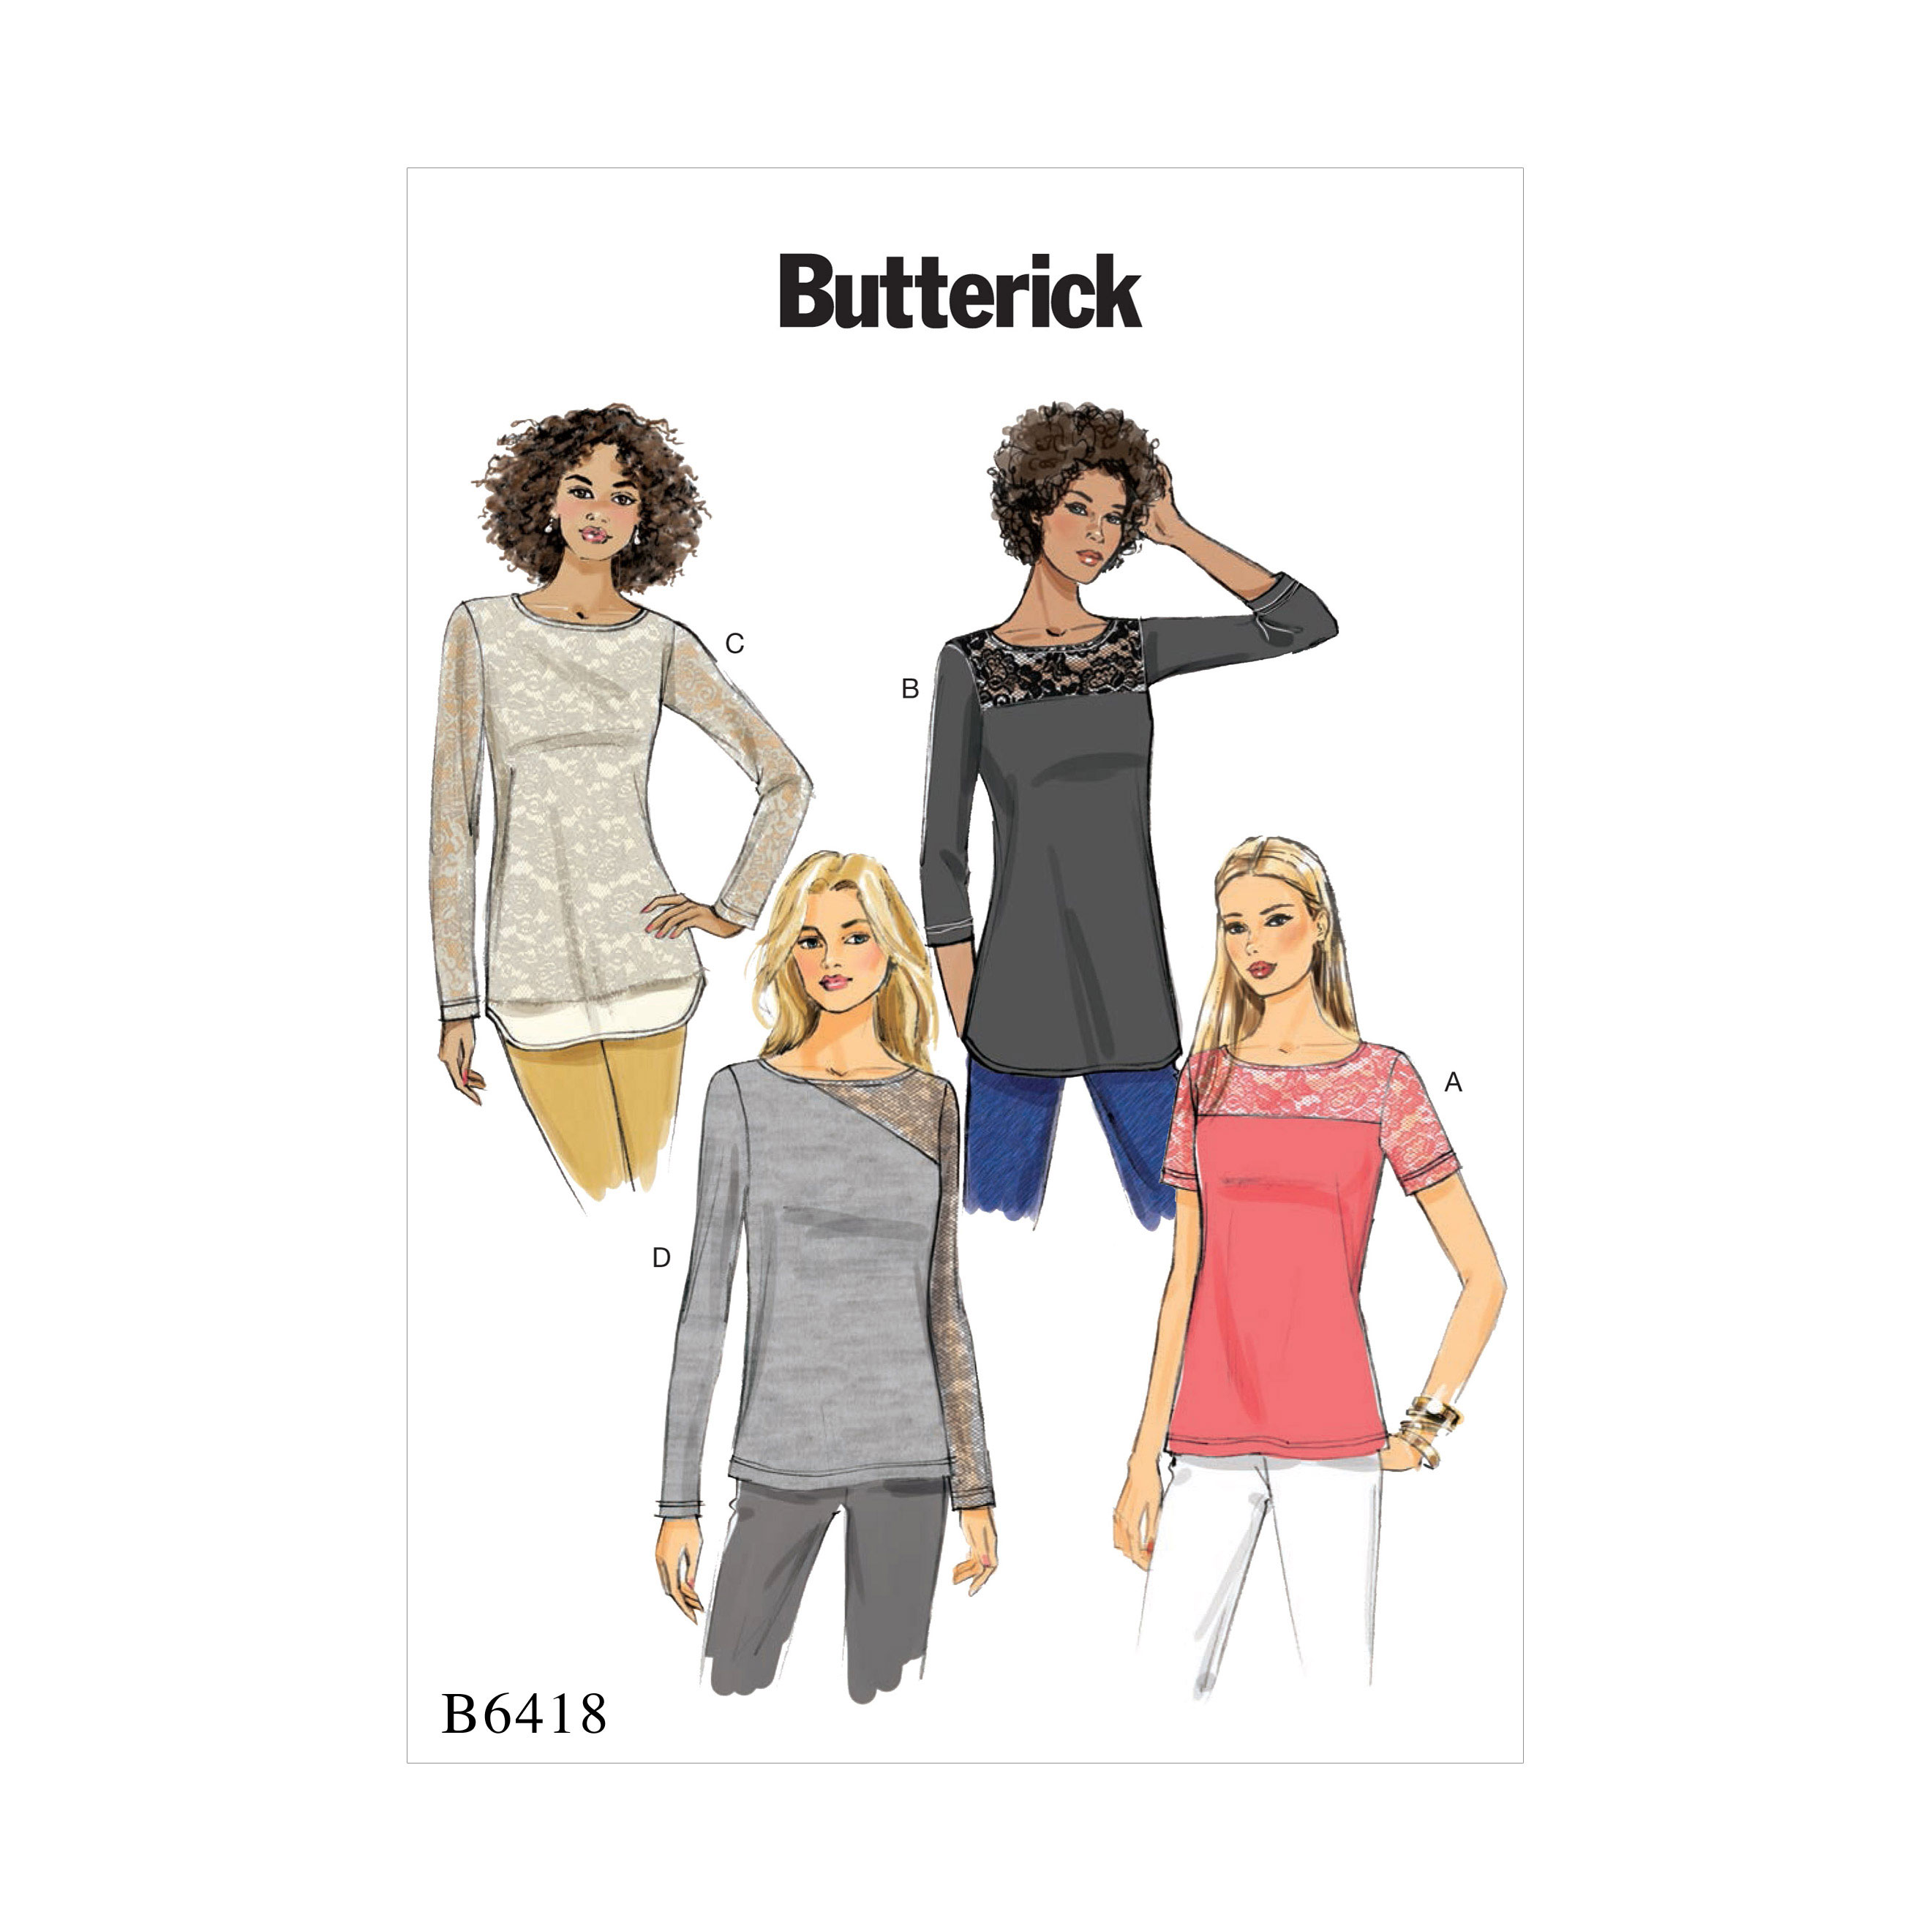 Top detail. Мода из Butterick.